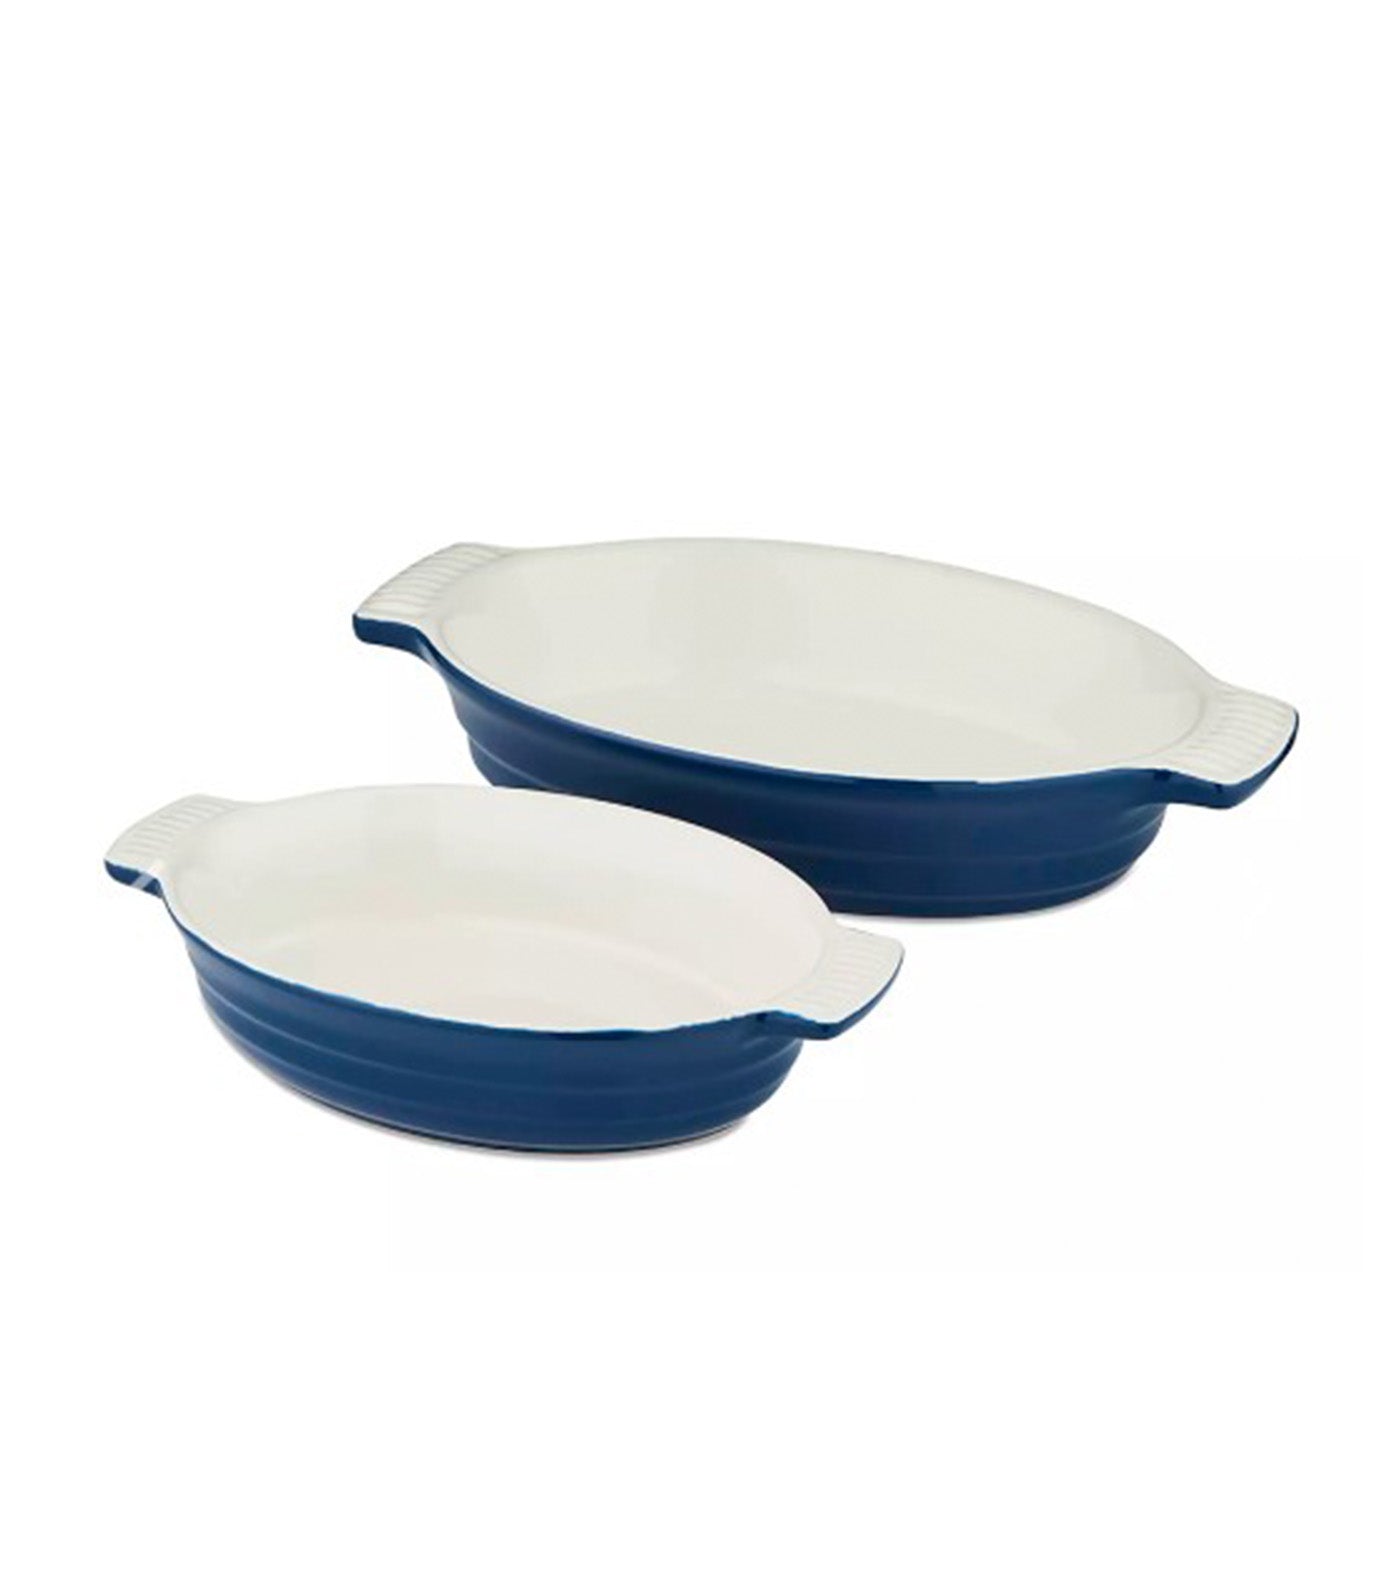 Set of Two Oval Oven Dishes